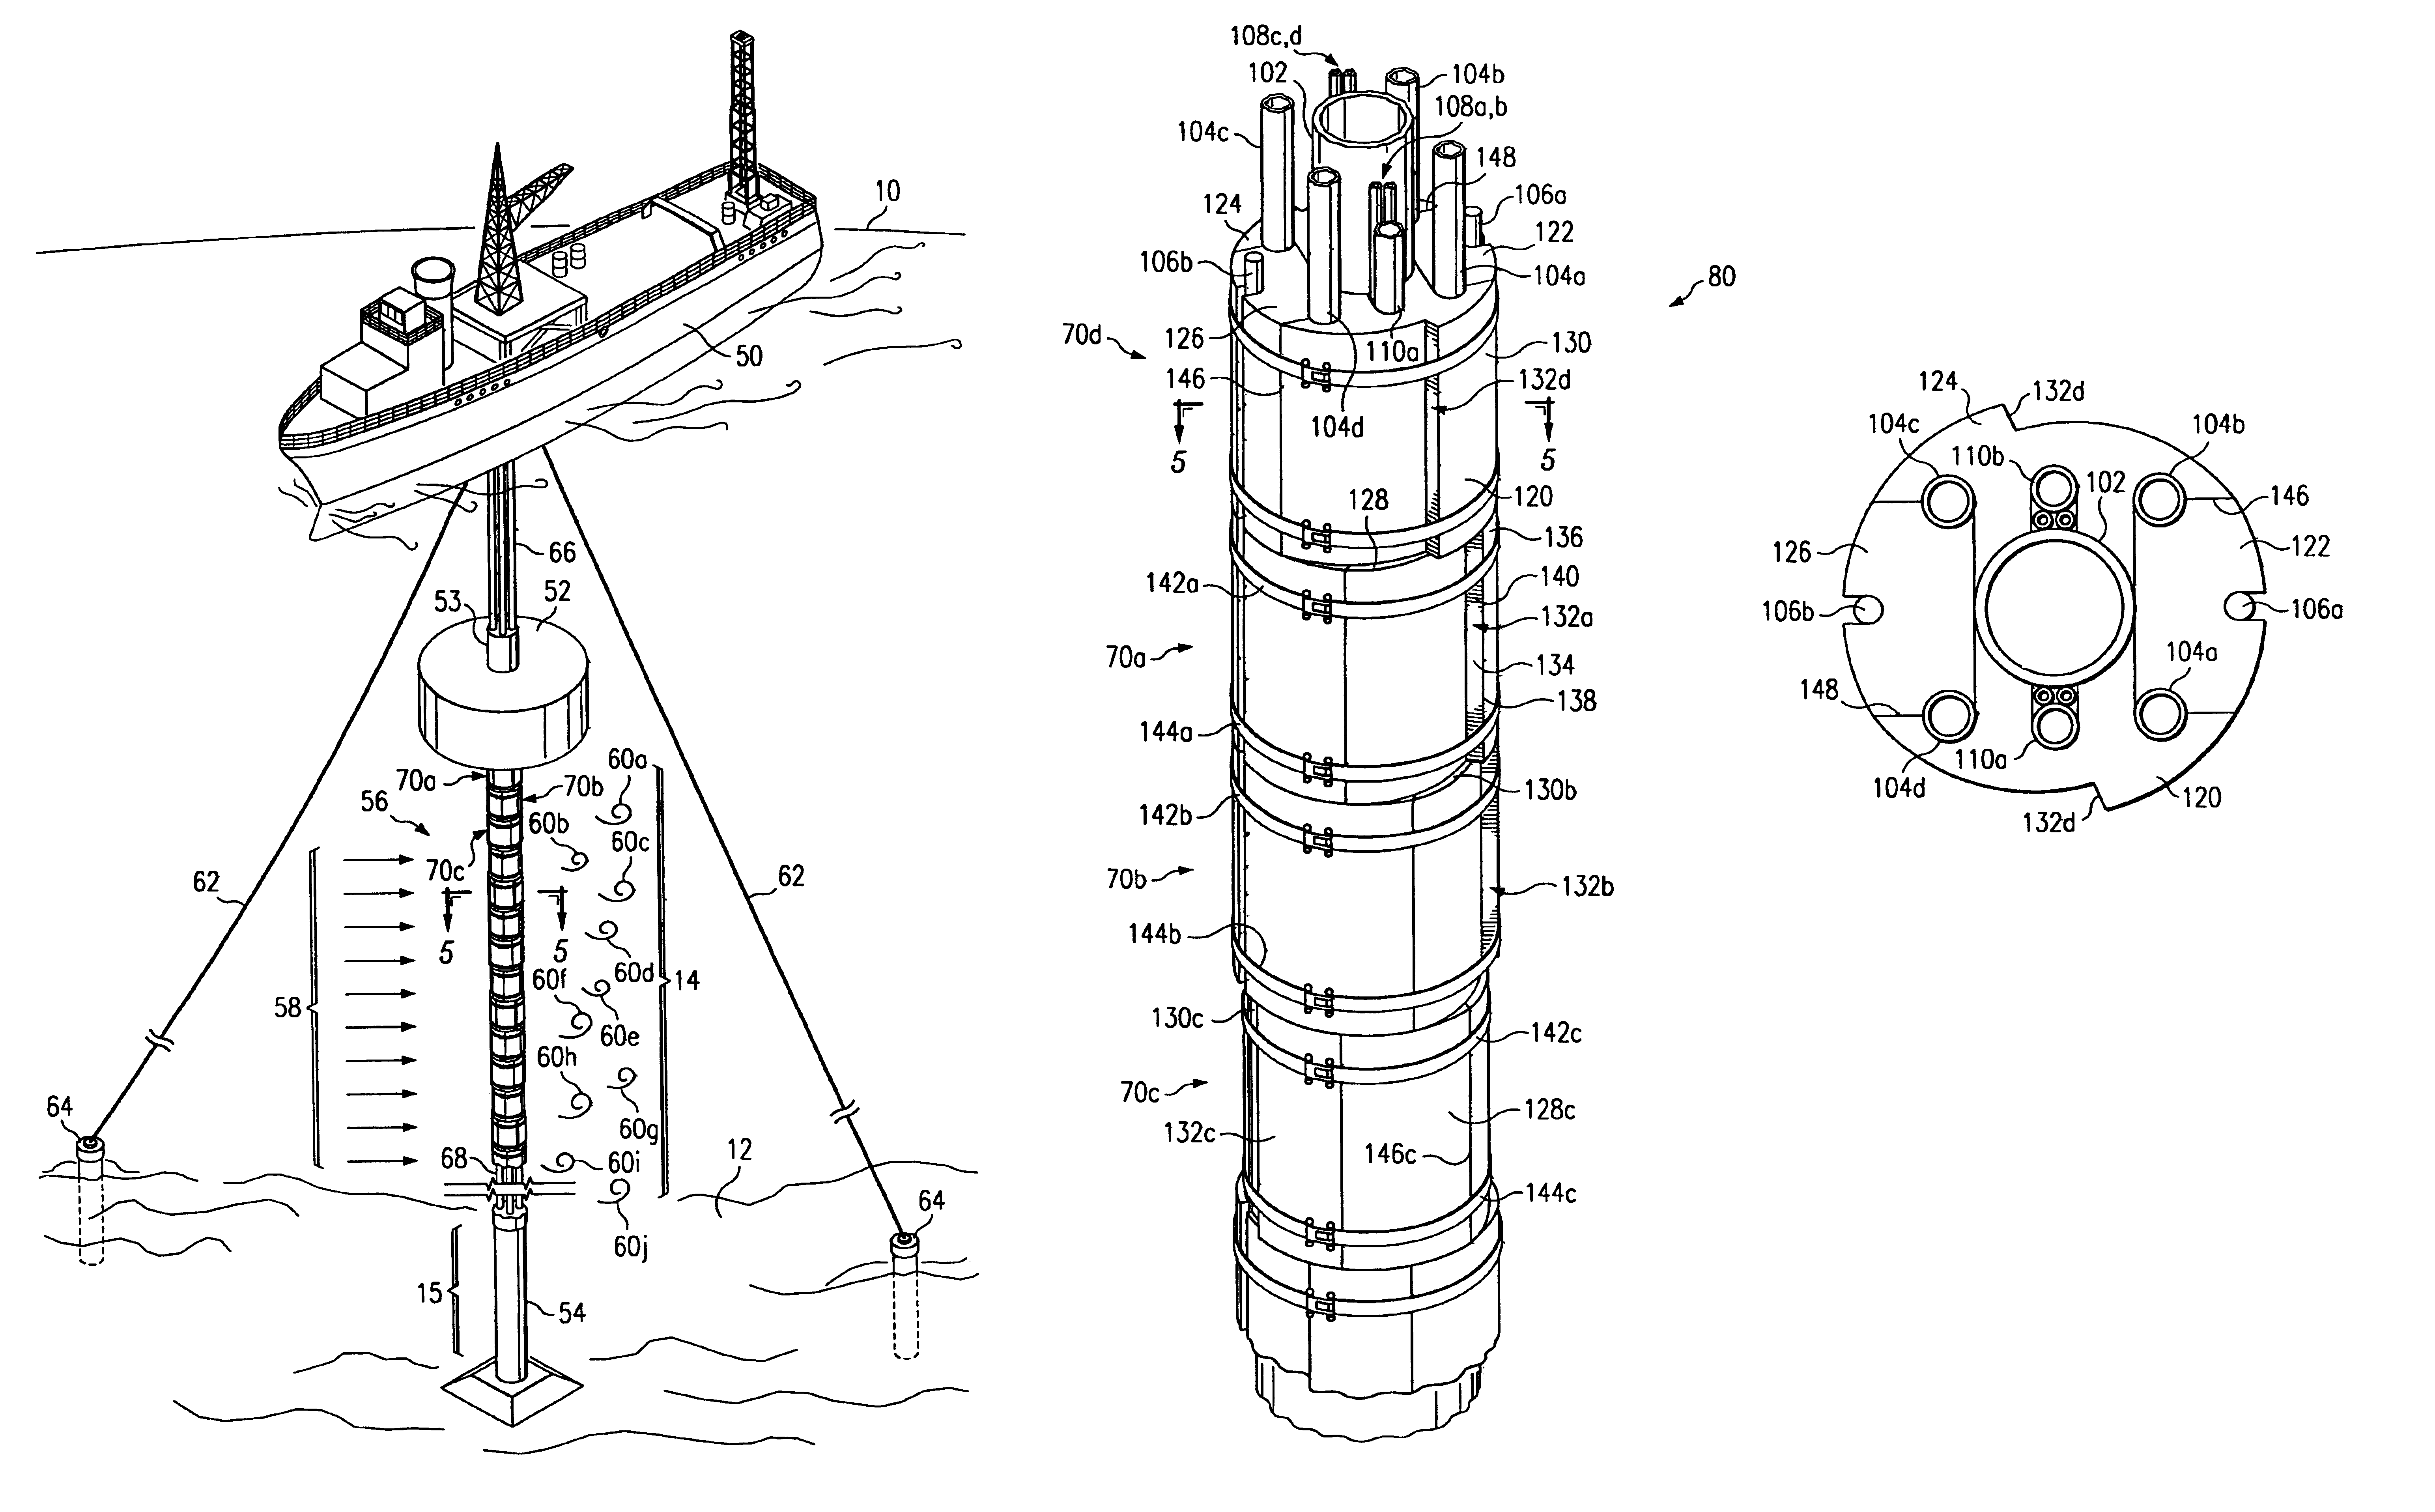 Vortex-induced vibration reduction device for fluid immersed cylinders